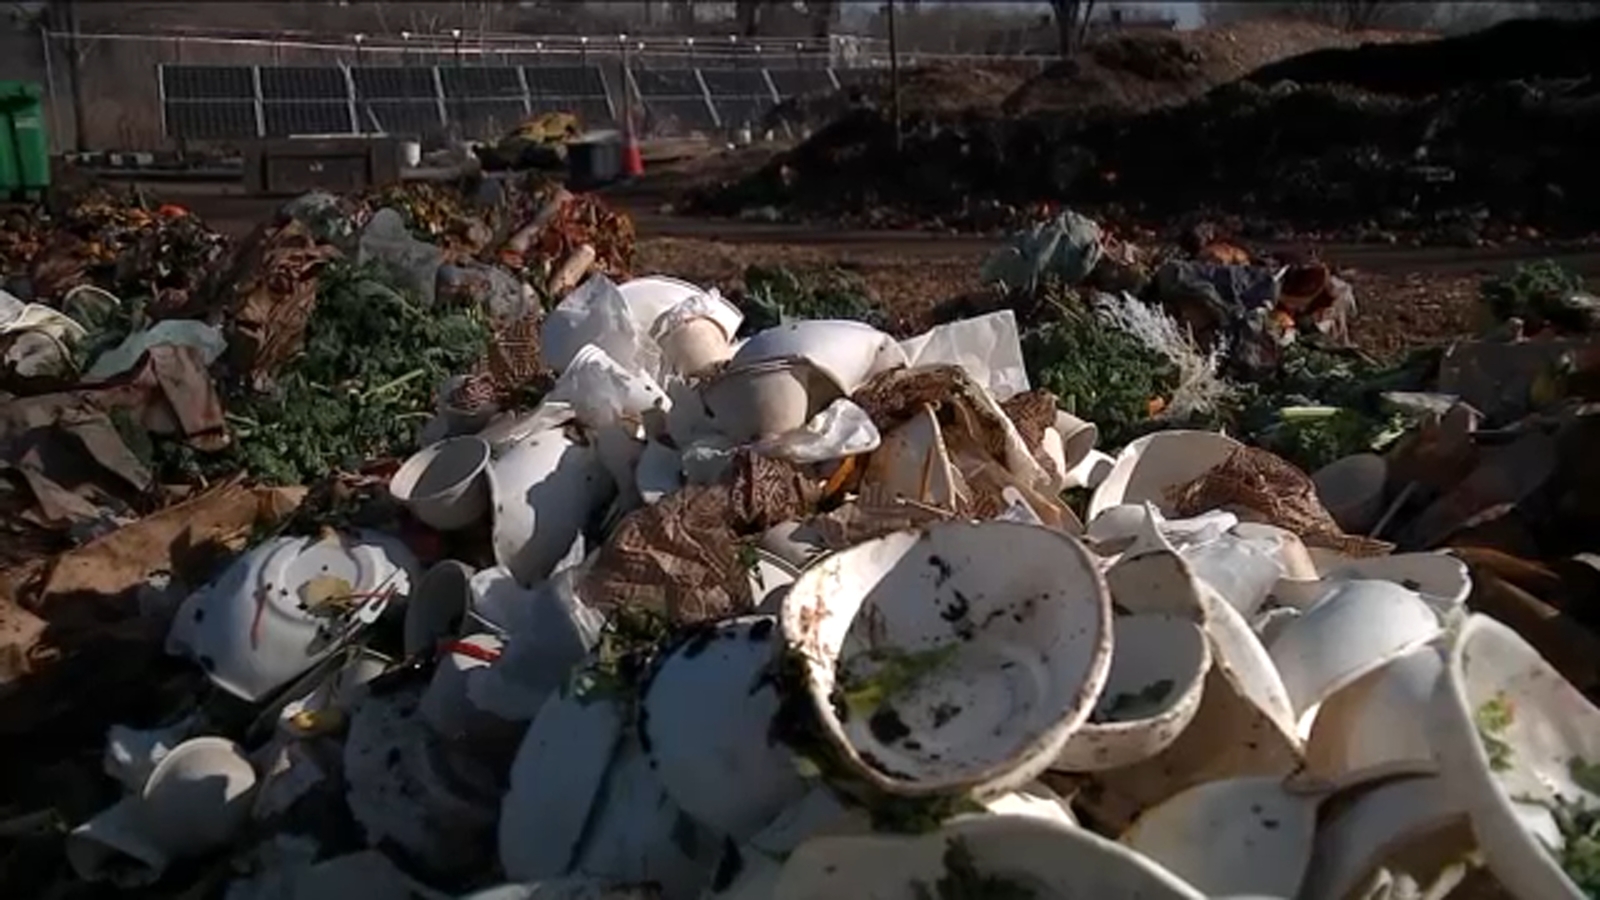 Composting Cut: Program teaching how to compost cut from New York City budget, as compost numbers ‘poor,’ says report [Video]